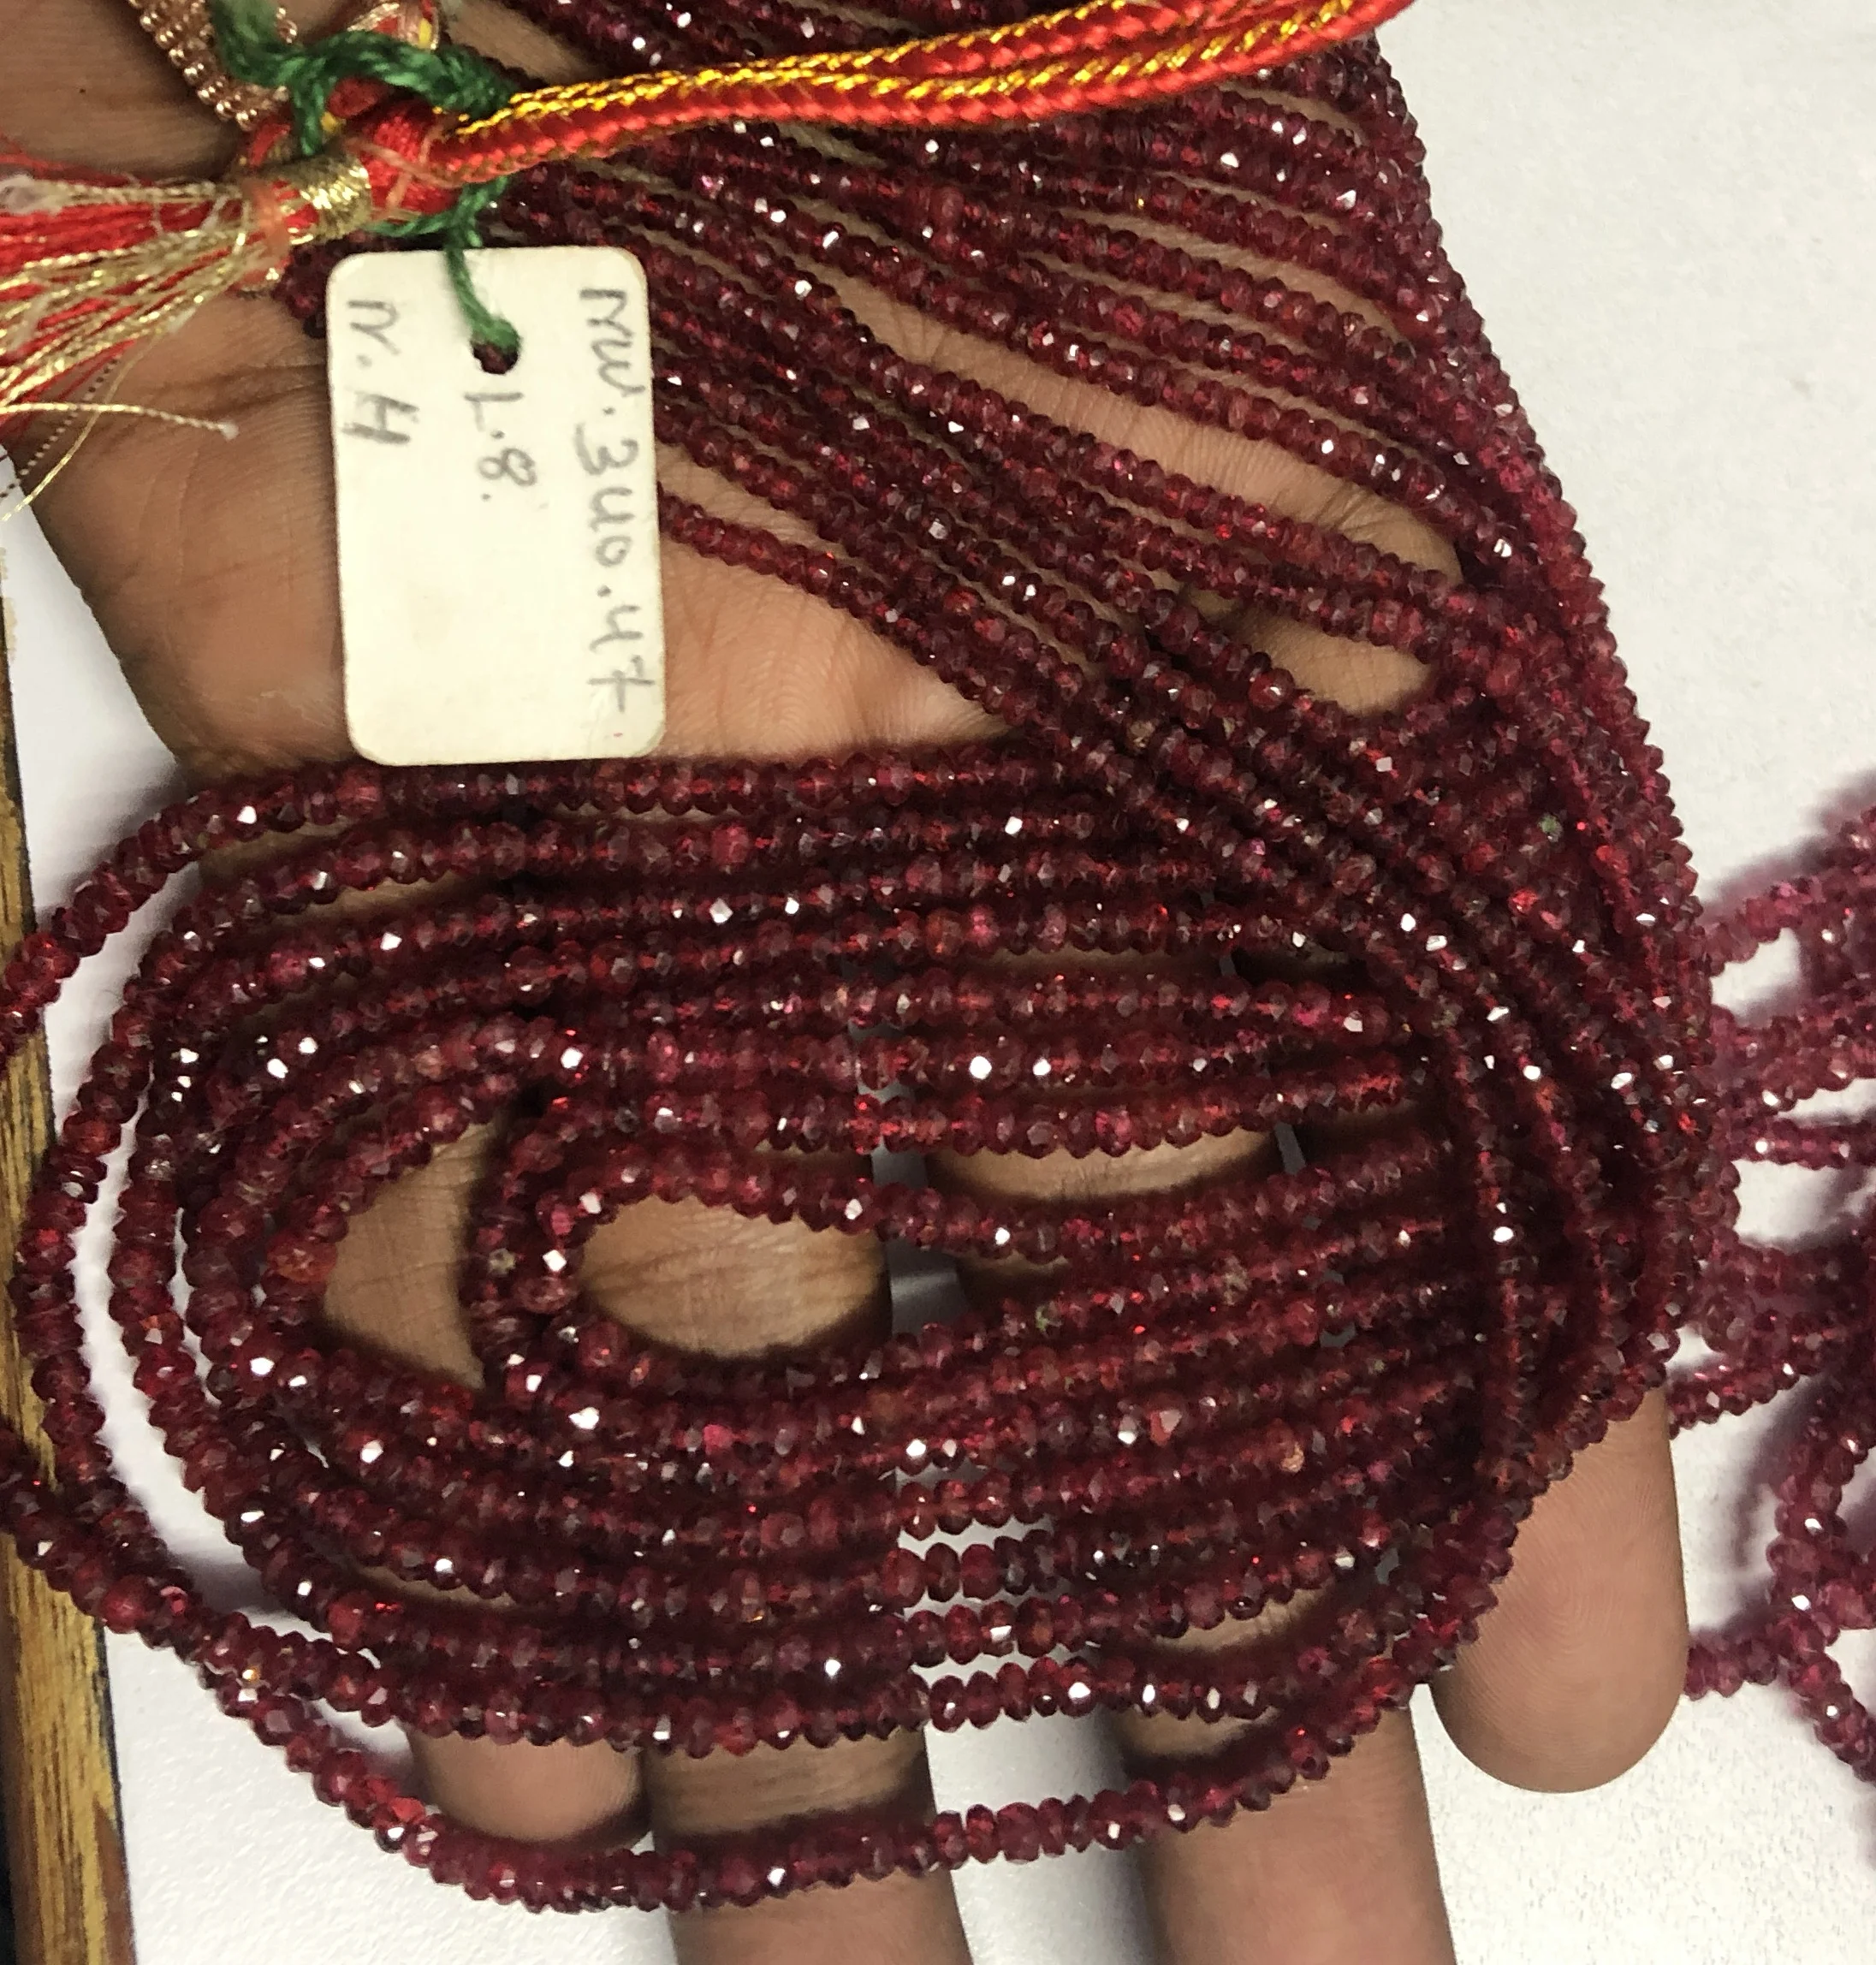 Wholesale Beads Supplier Top Quality Red Spinel Bulk Beads Strands Natural Red Spinel 4mm Beads Faceted Rondelle Beads For Jewelry Making